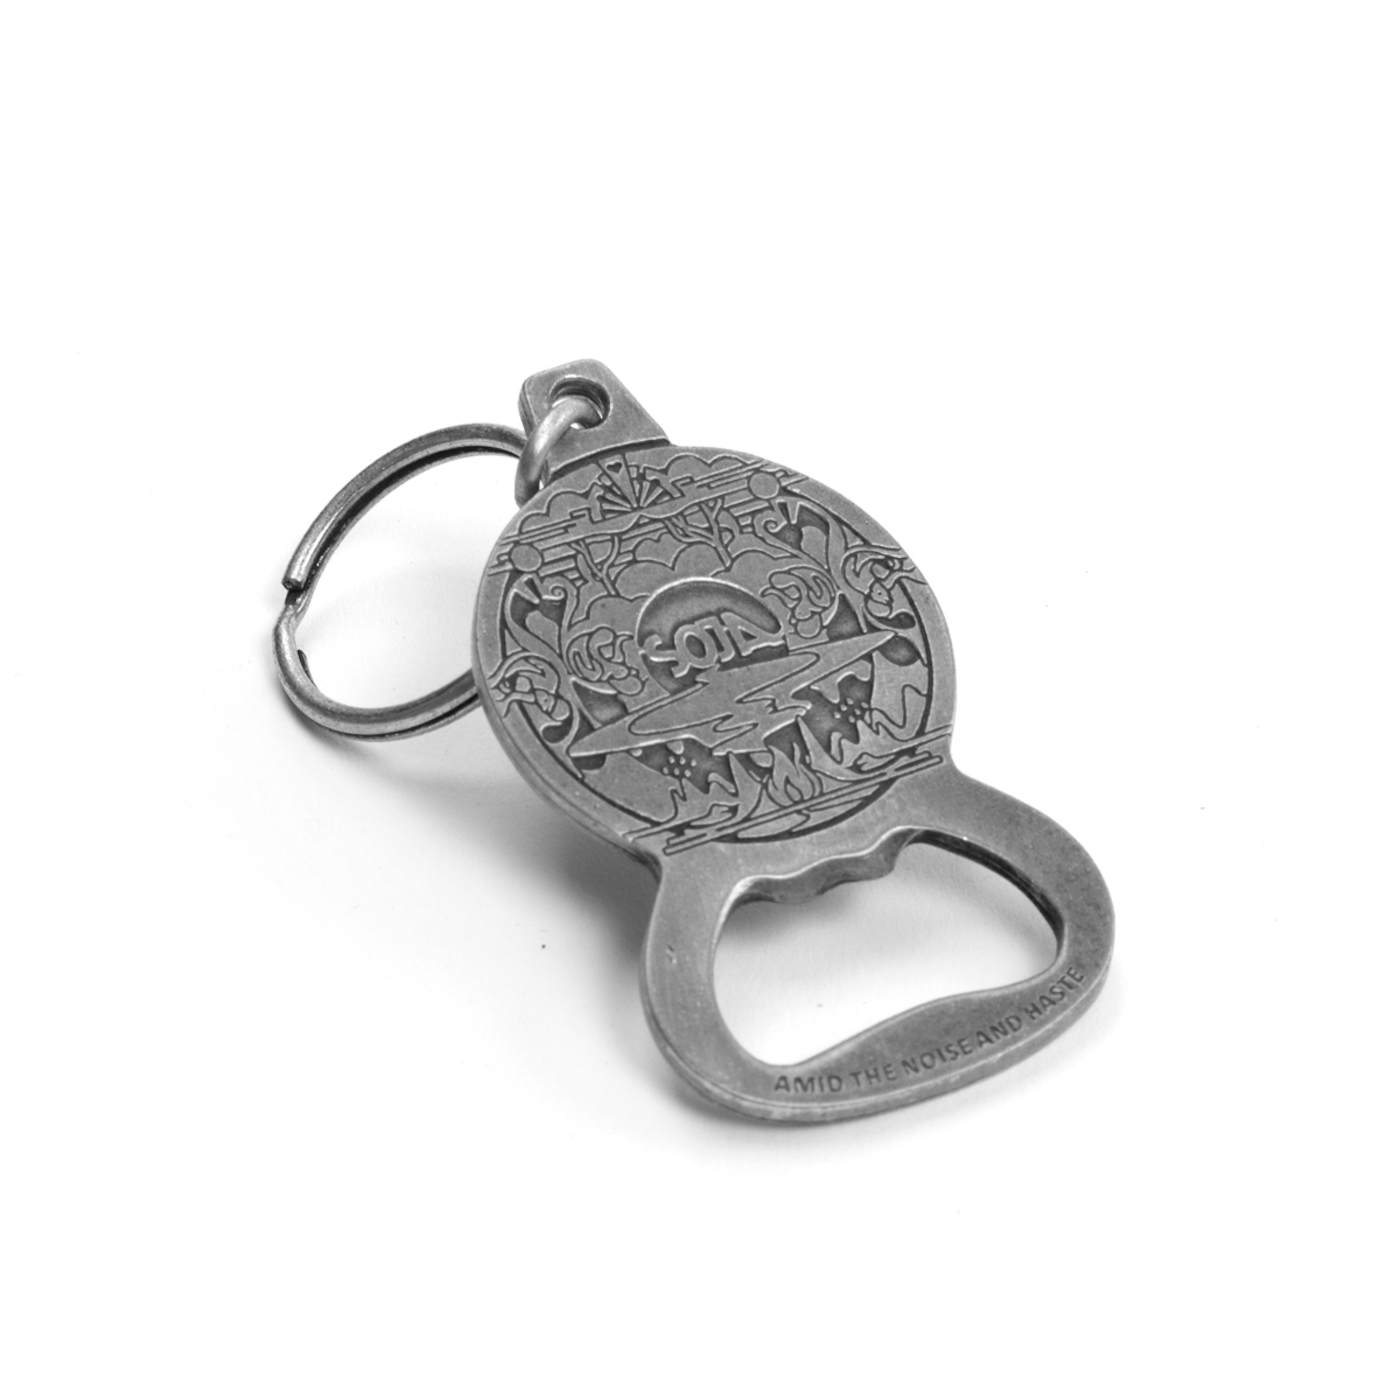 SOJA Amid The Noise and Haste Keychain Bottle Opener